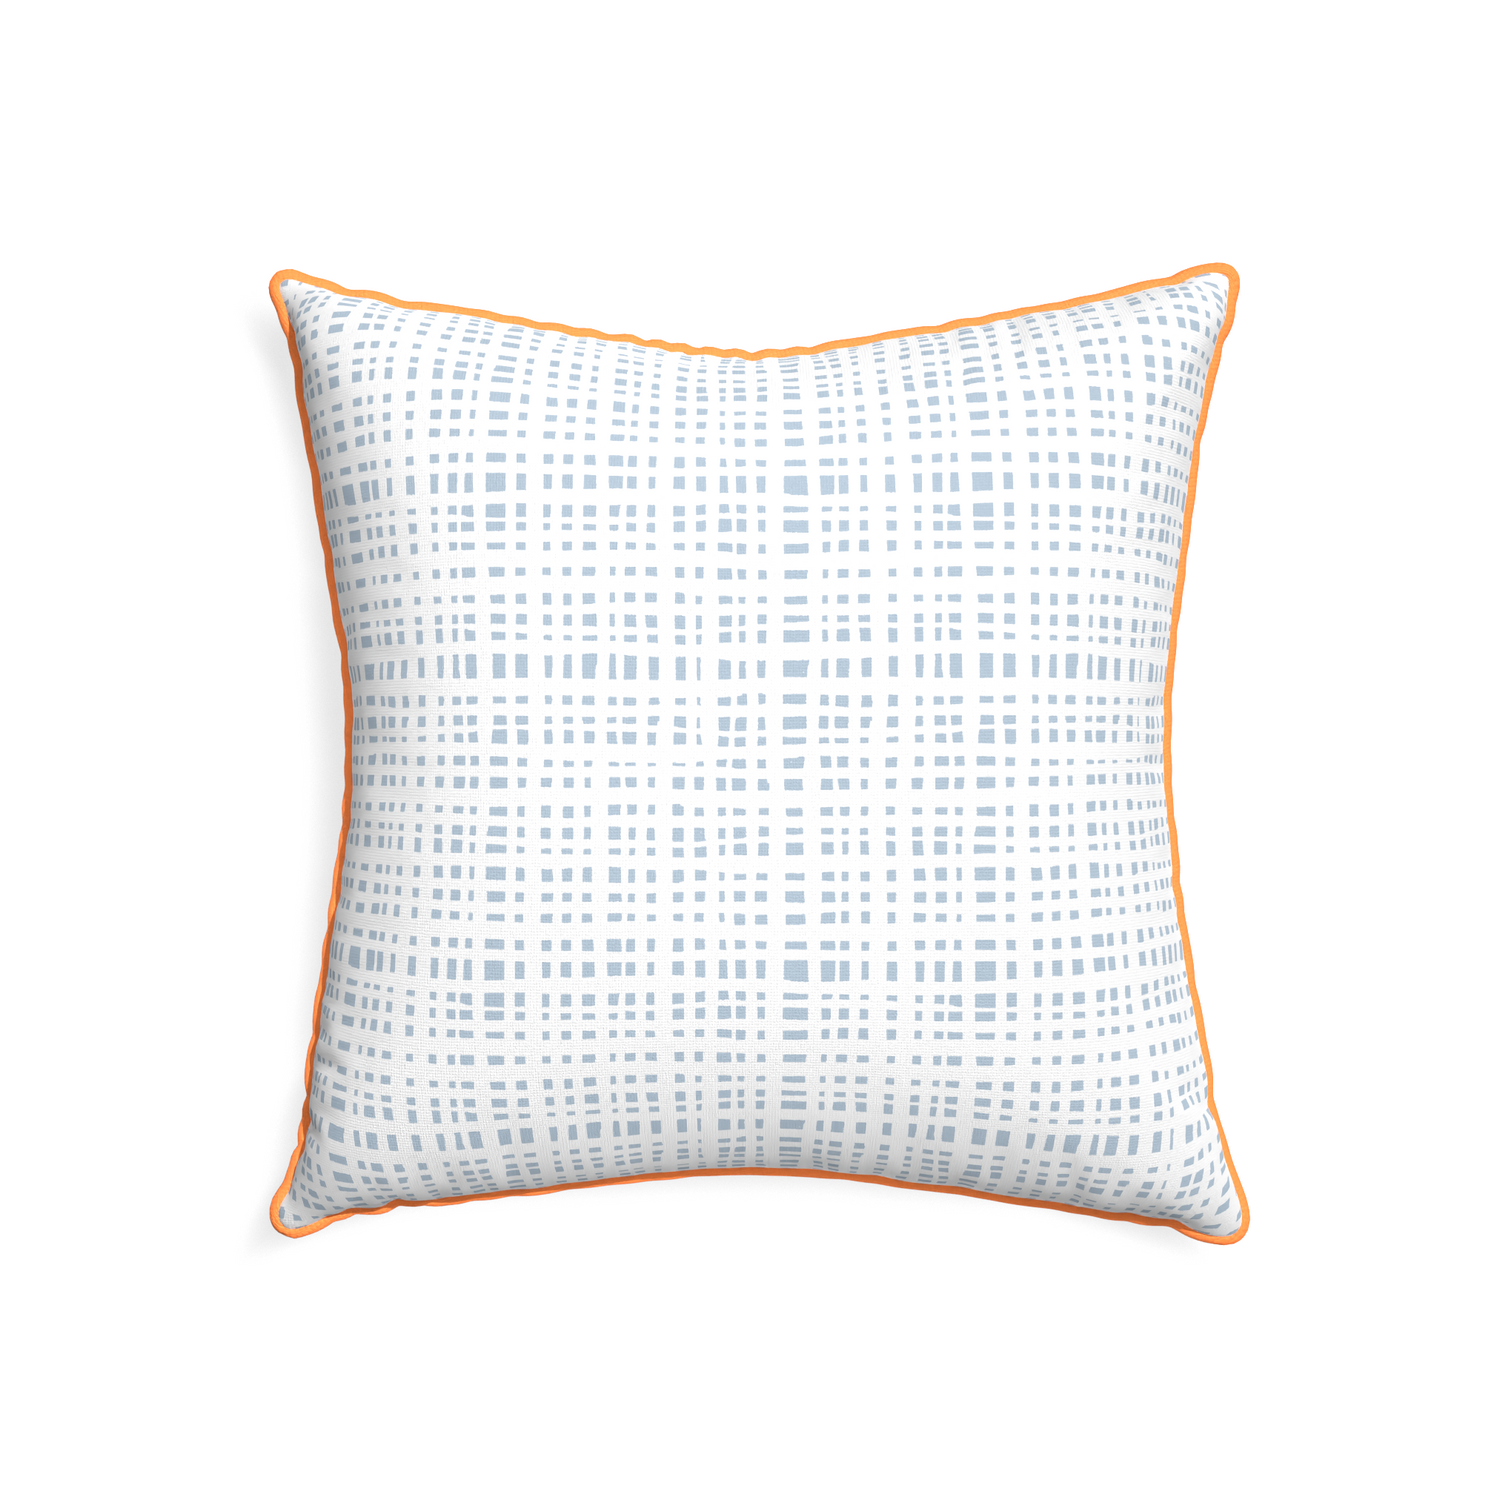 22-square ginger sky custom pillow with clementine piping on white background